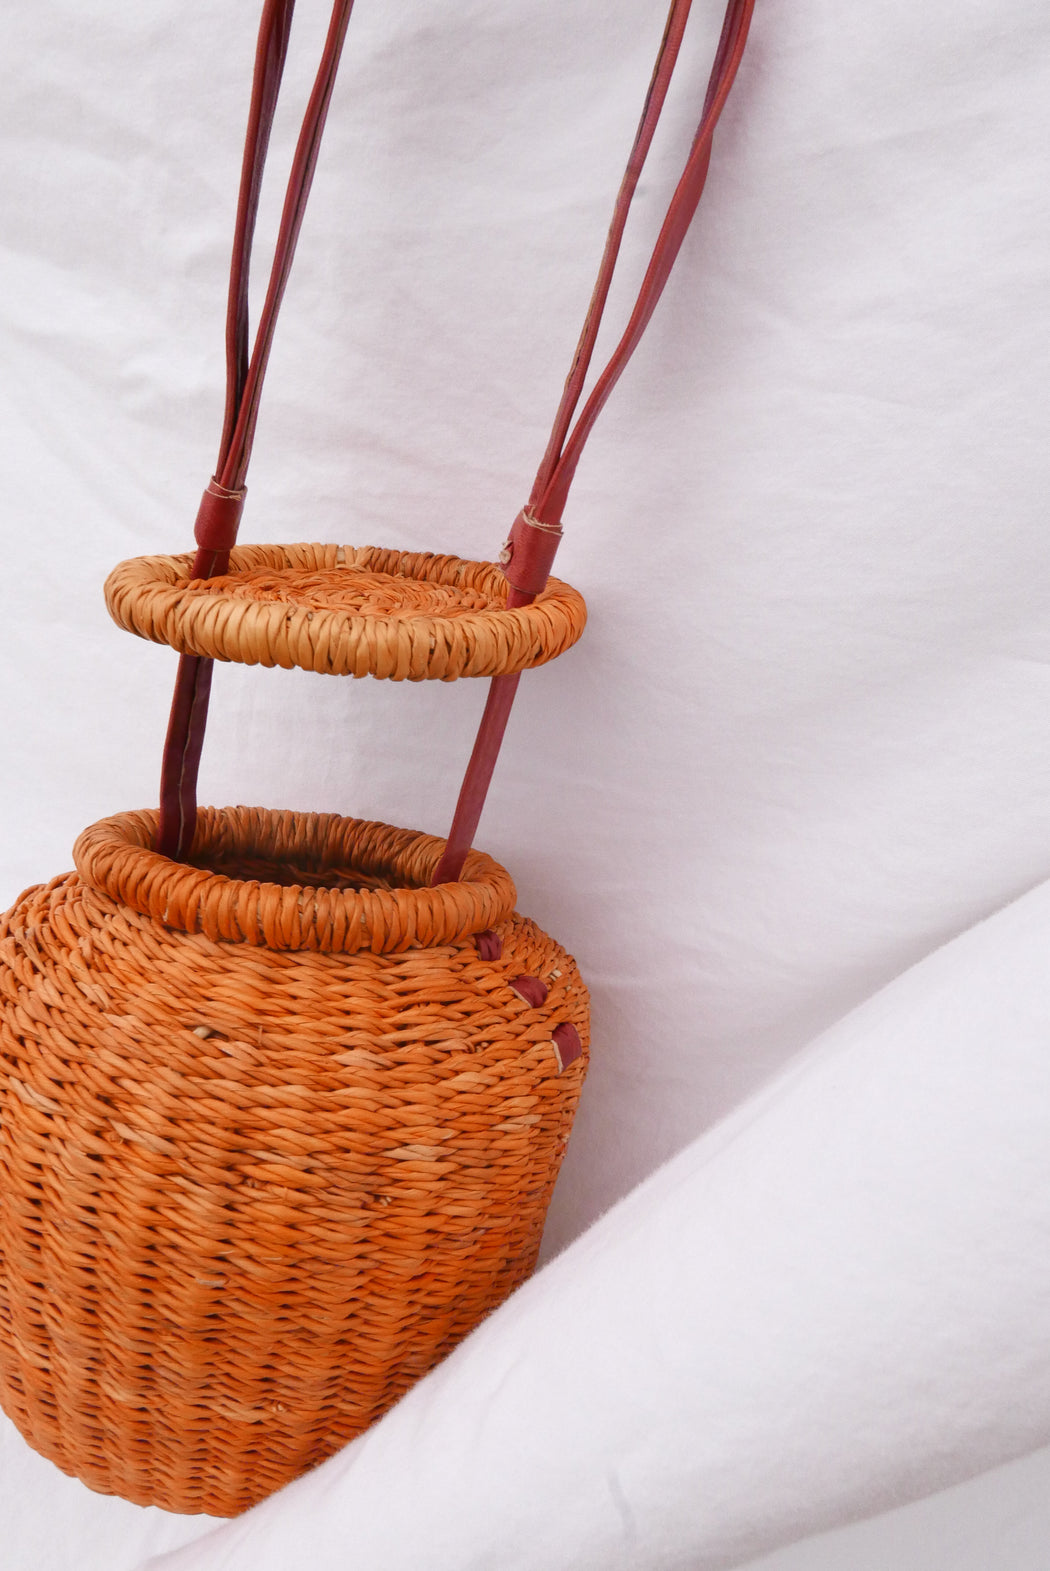 The orange Alobahe handbag is handwoven with straw called Kinkahe in Sherigu, Ghana. The shape is versatile and opens from the lid lifted vertical with an adjustable leather strap that can be worn as a crossbody or a handheld bag. This product supports a community with employment, educational opportunities for the children and improve the work environment.